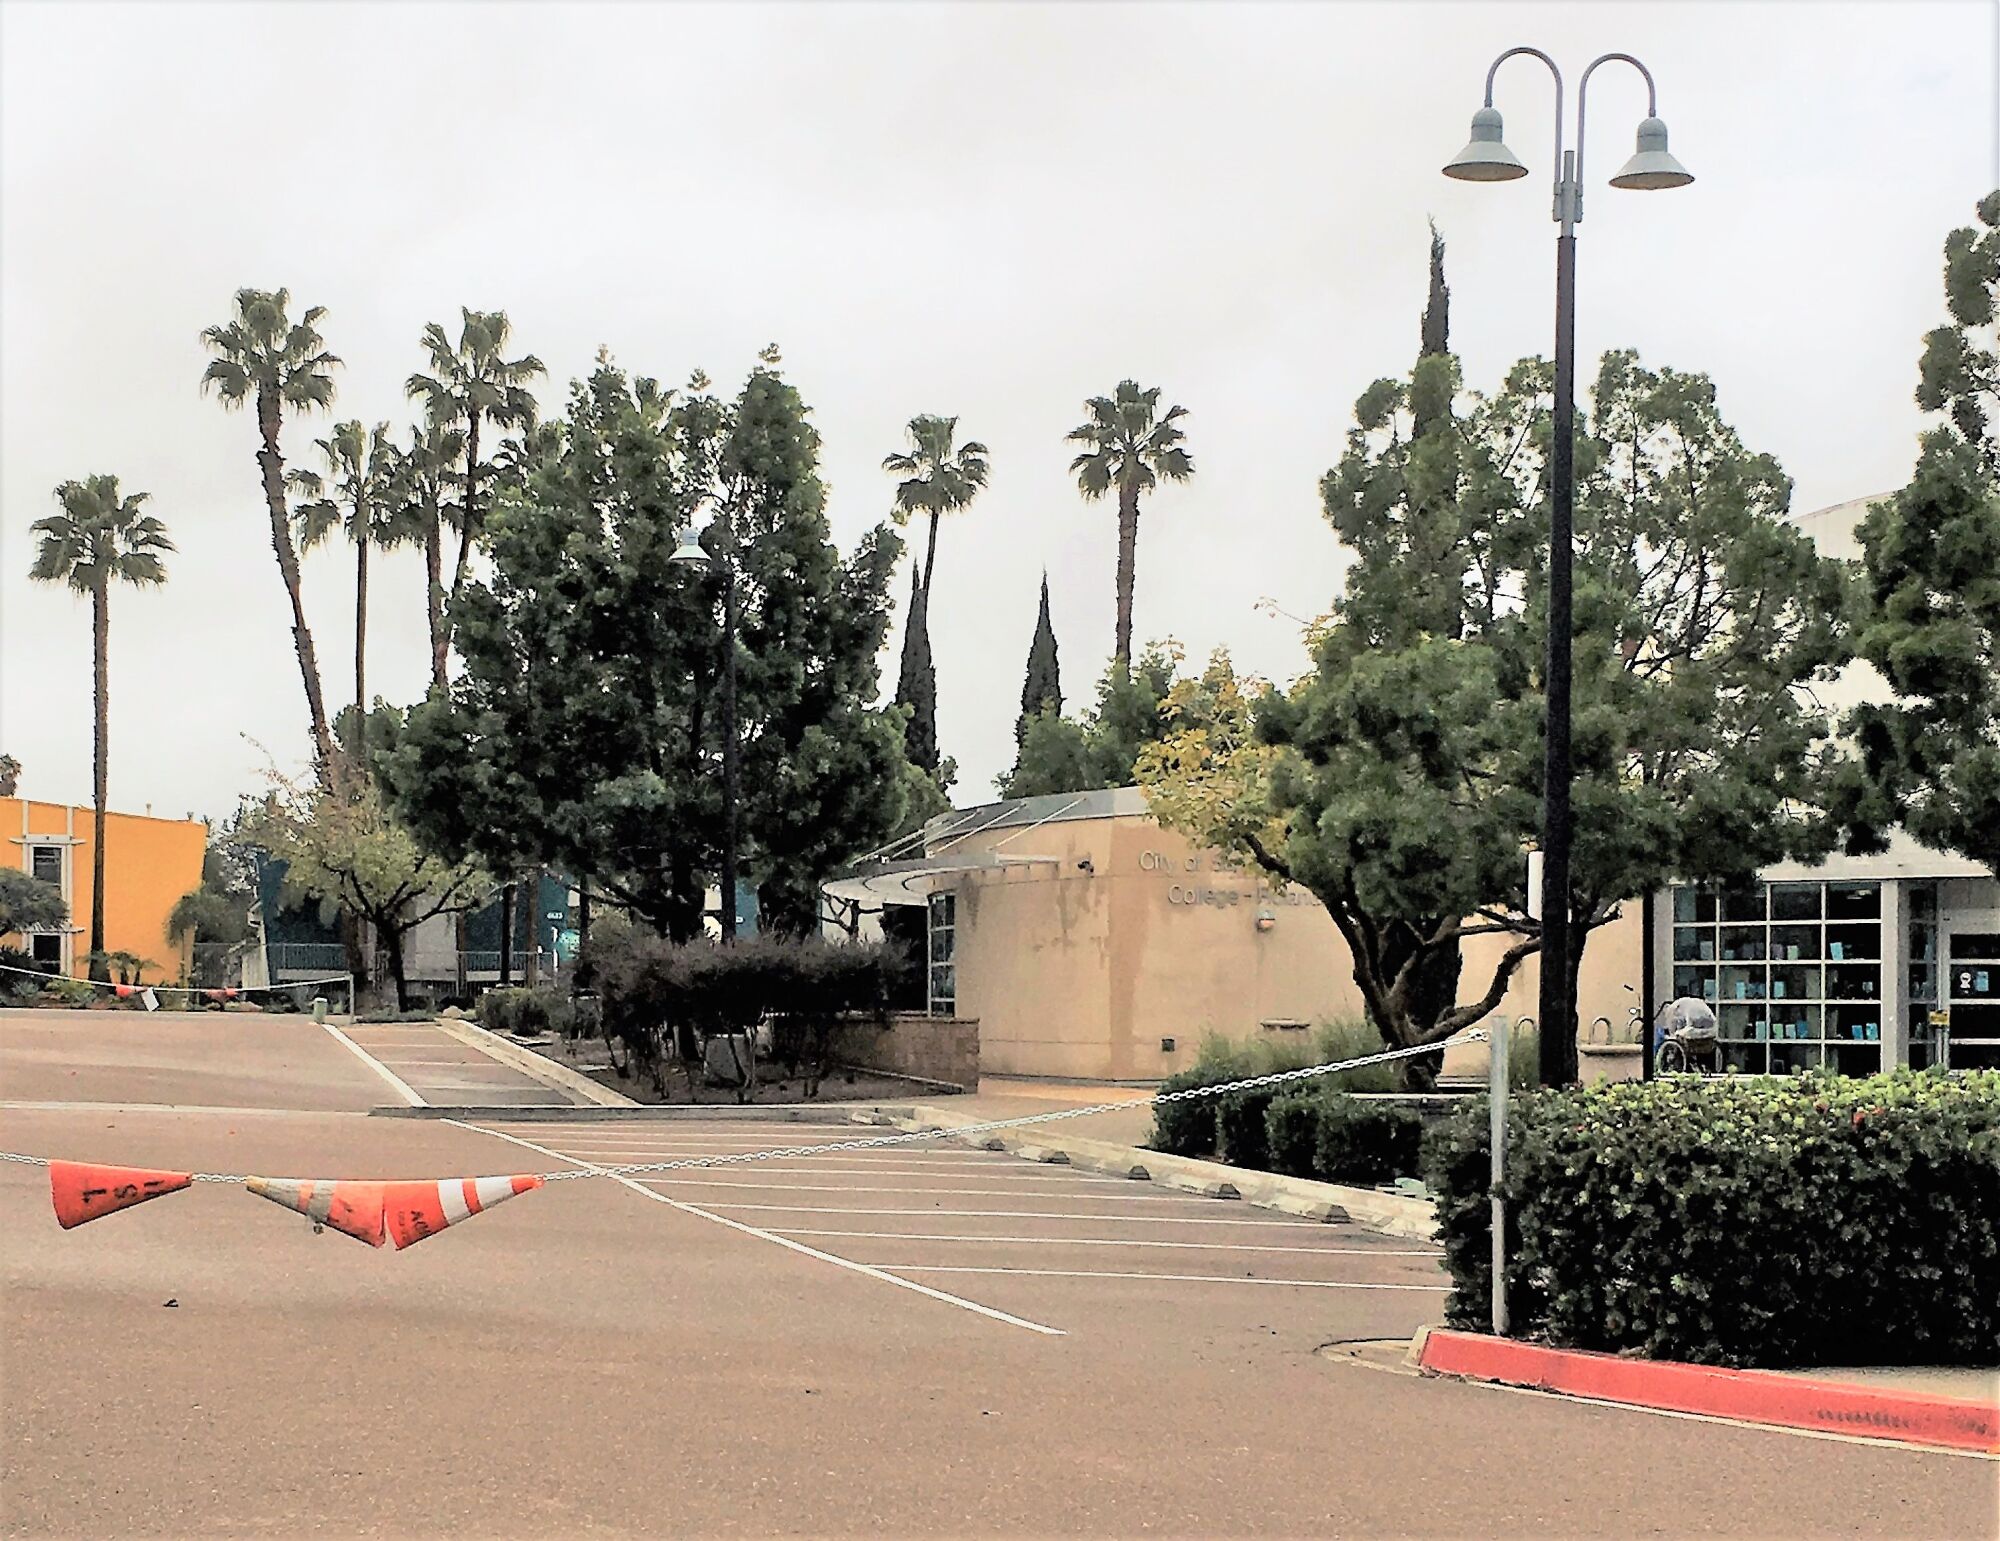 A chain with traffic cones strung on it is seen blocking off a driveway, with palm trees in the background.